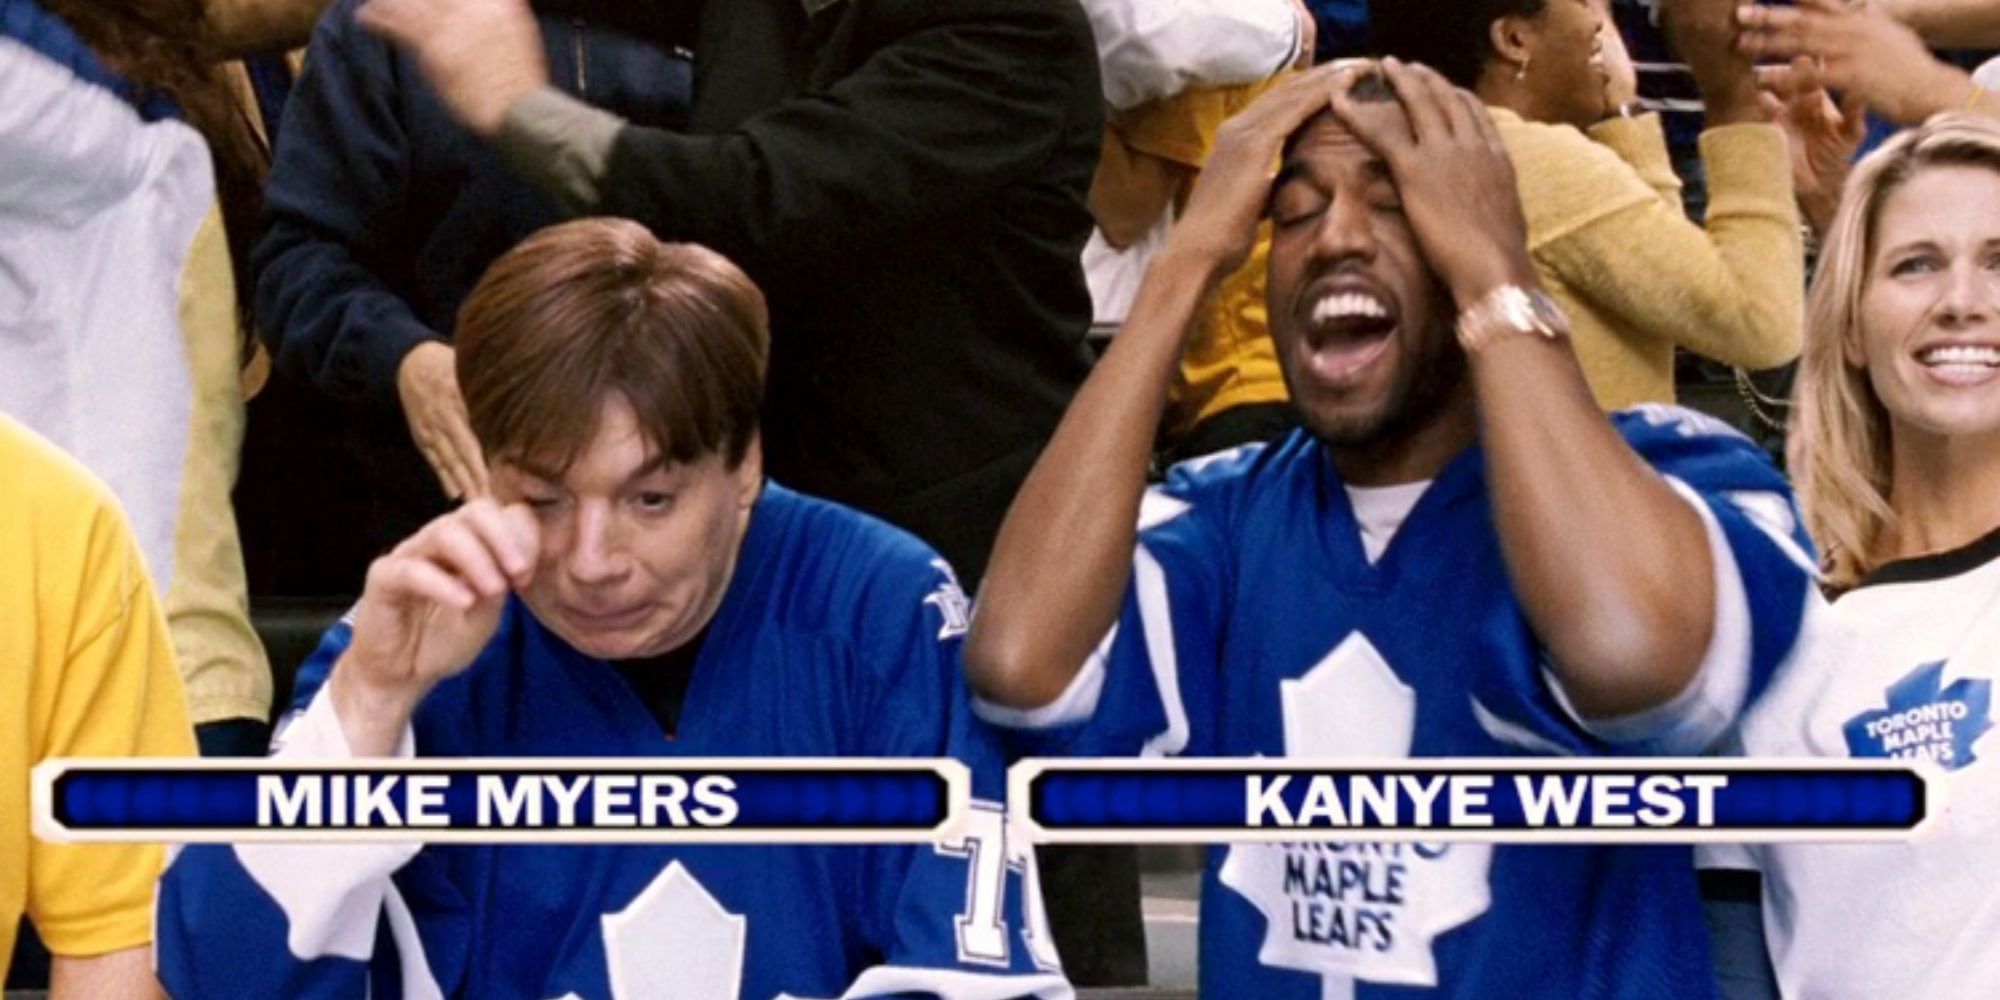 kanye west in the love guru with mike myers maple leafs jerseys